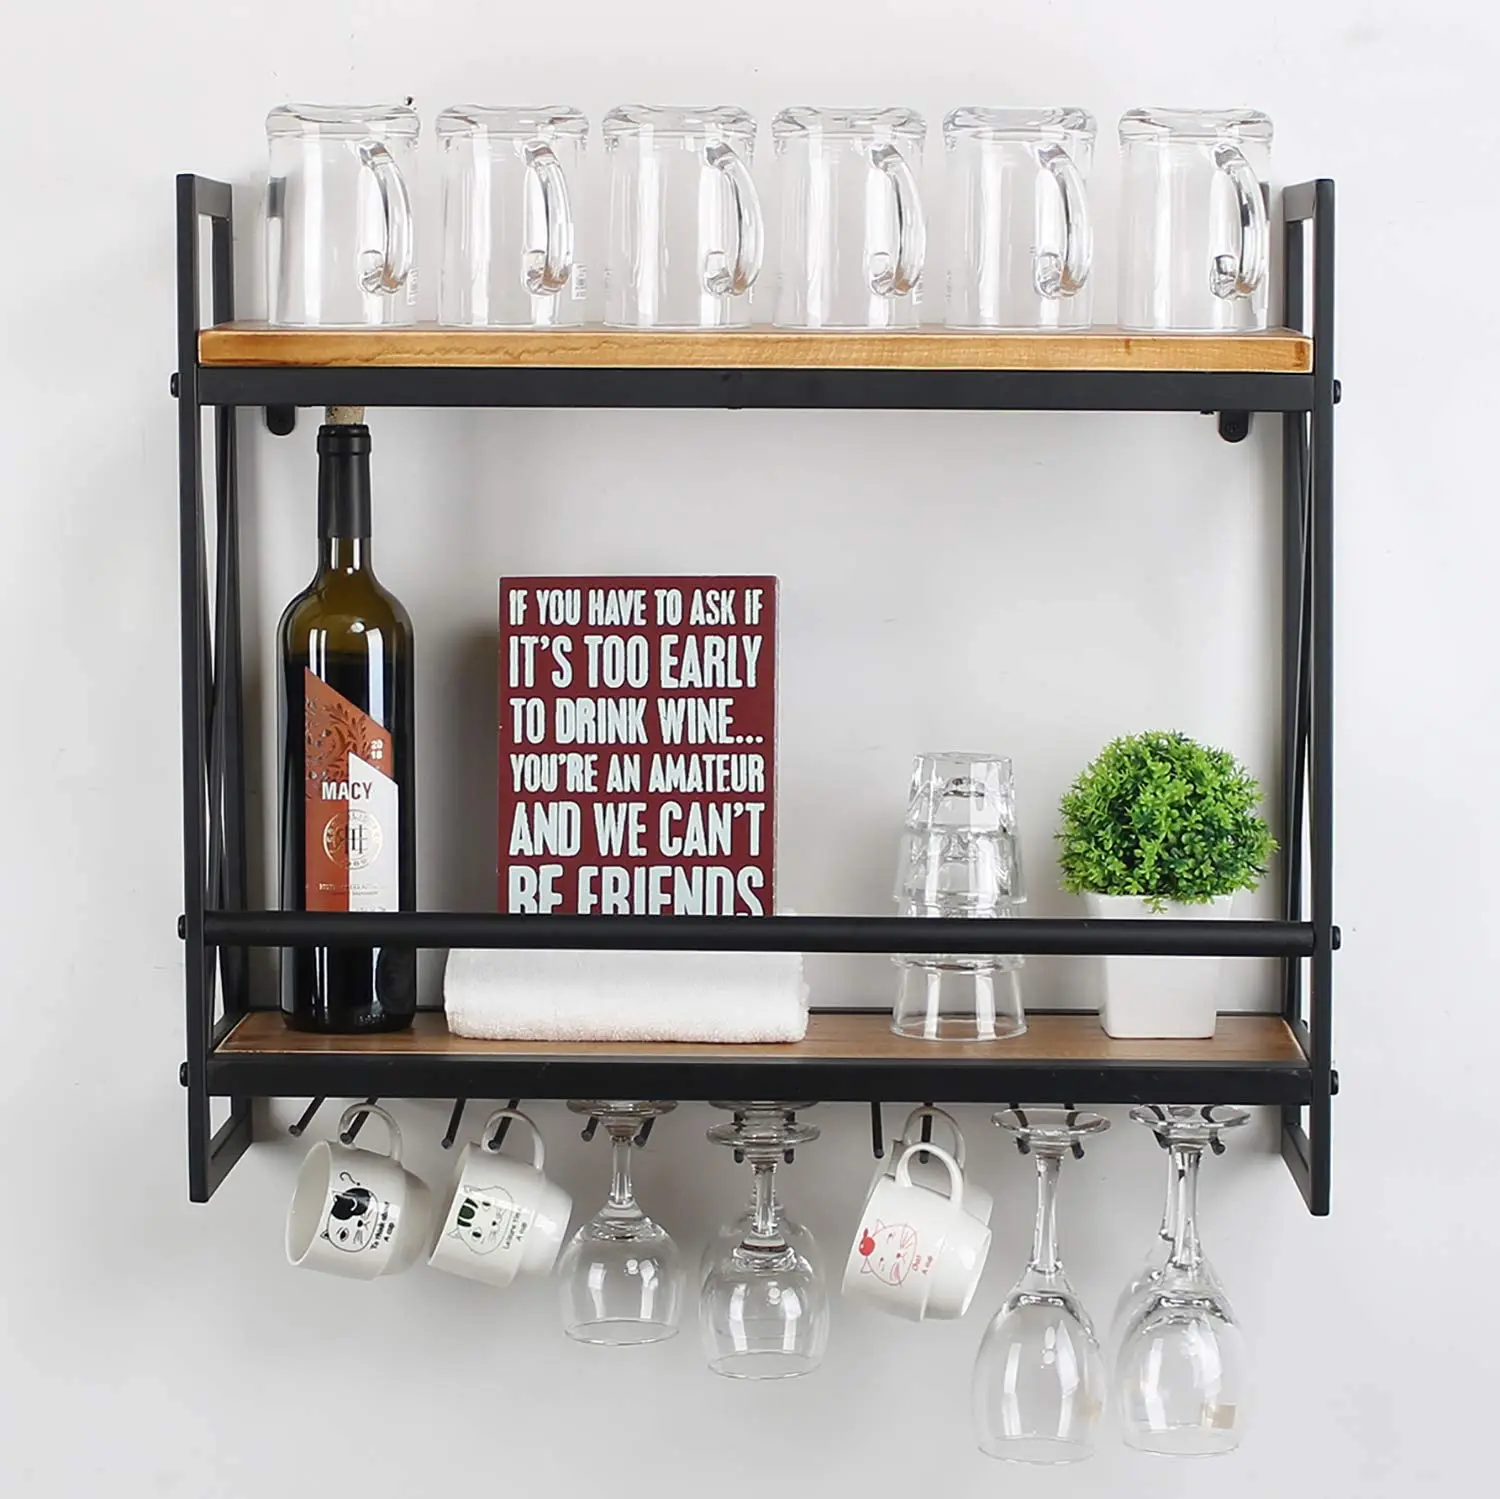 Industrial Wine Racks Wall Mounted with 6 Stem Glass Holder,24in Rustic Metal Hanging Wine Holder,2-Tiers Wall Mount Bottle Holder Glass Rack,Wood Shelves Wall Shelf Wine Accessories 